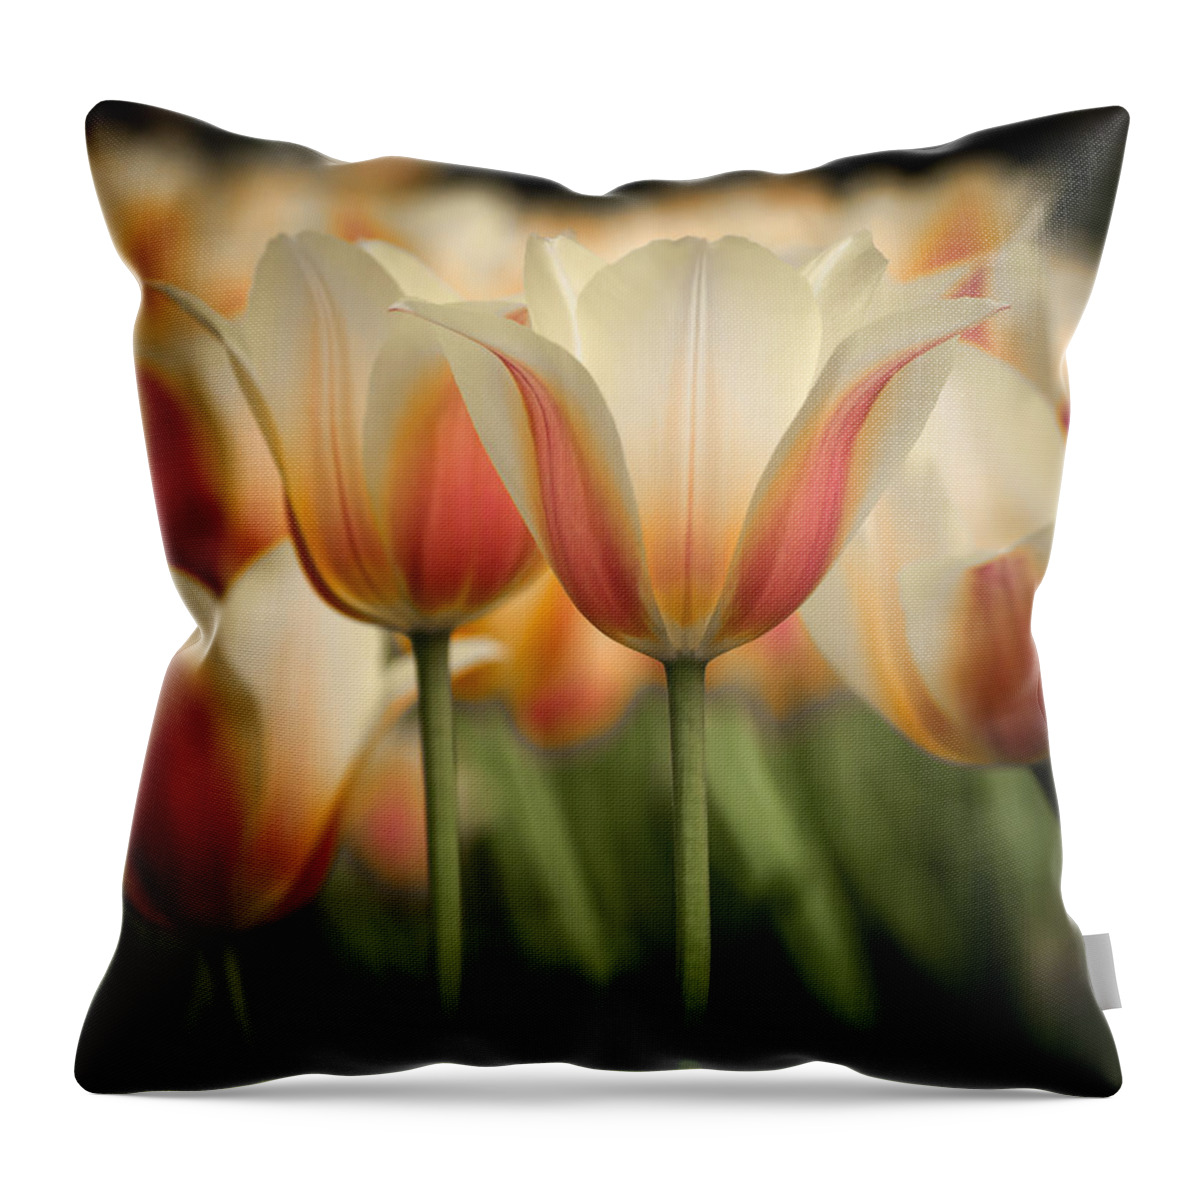 Tulip Throw Pillow featuring the photograph Only Tulips by James Barber